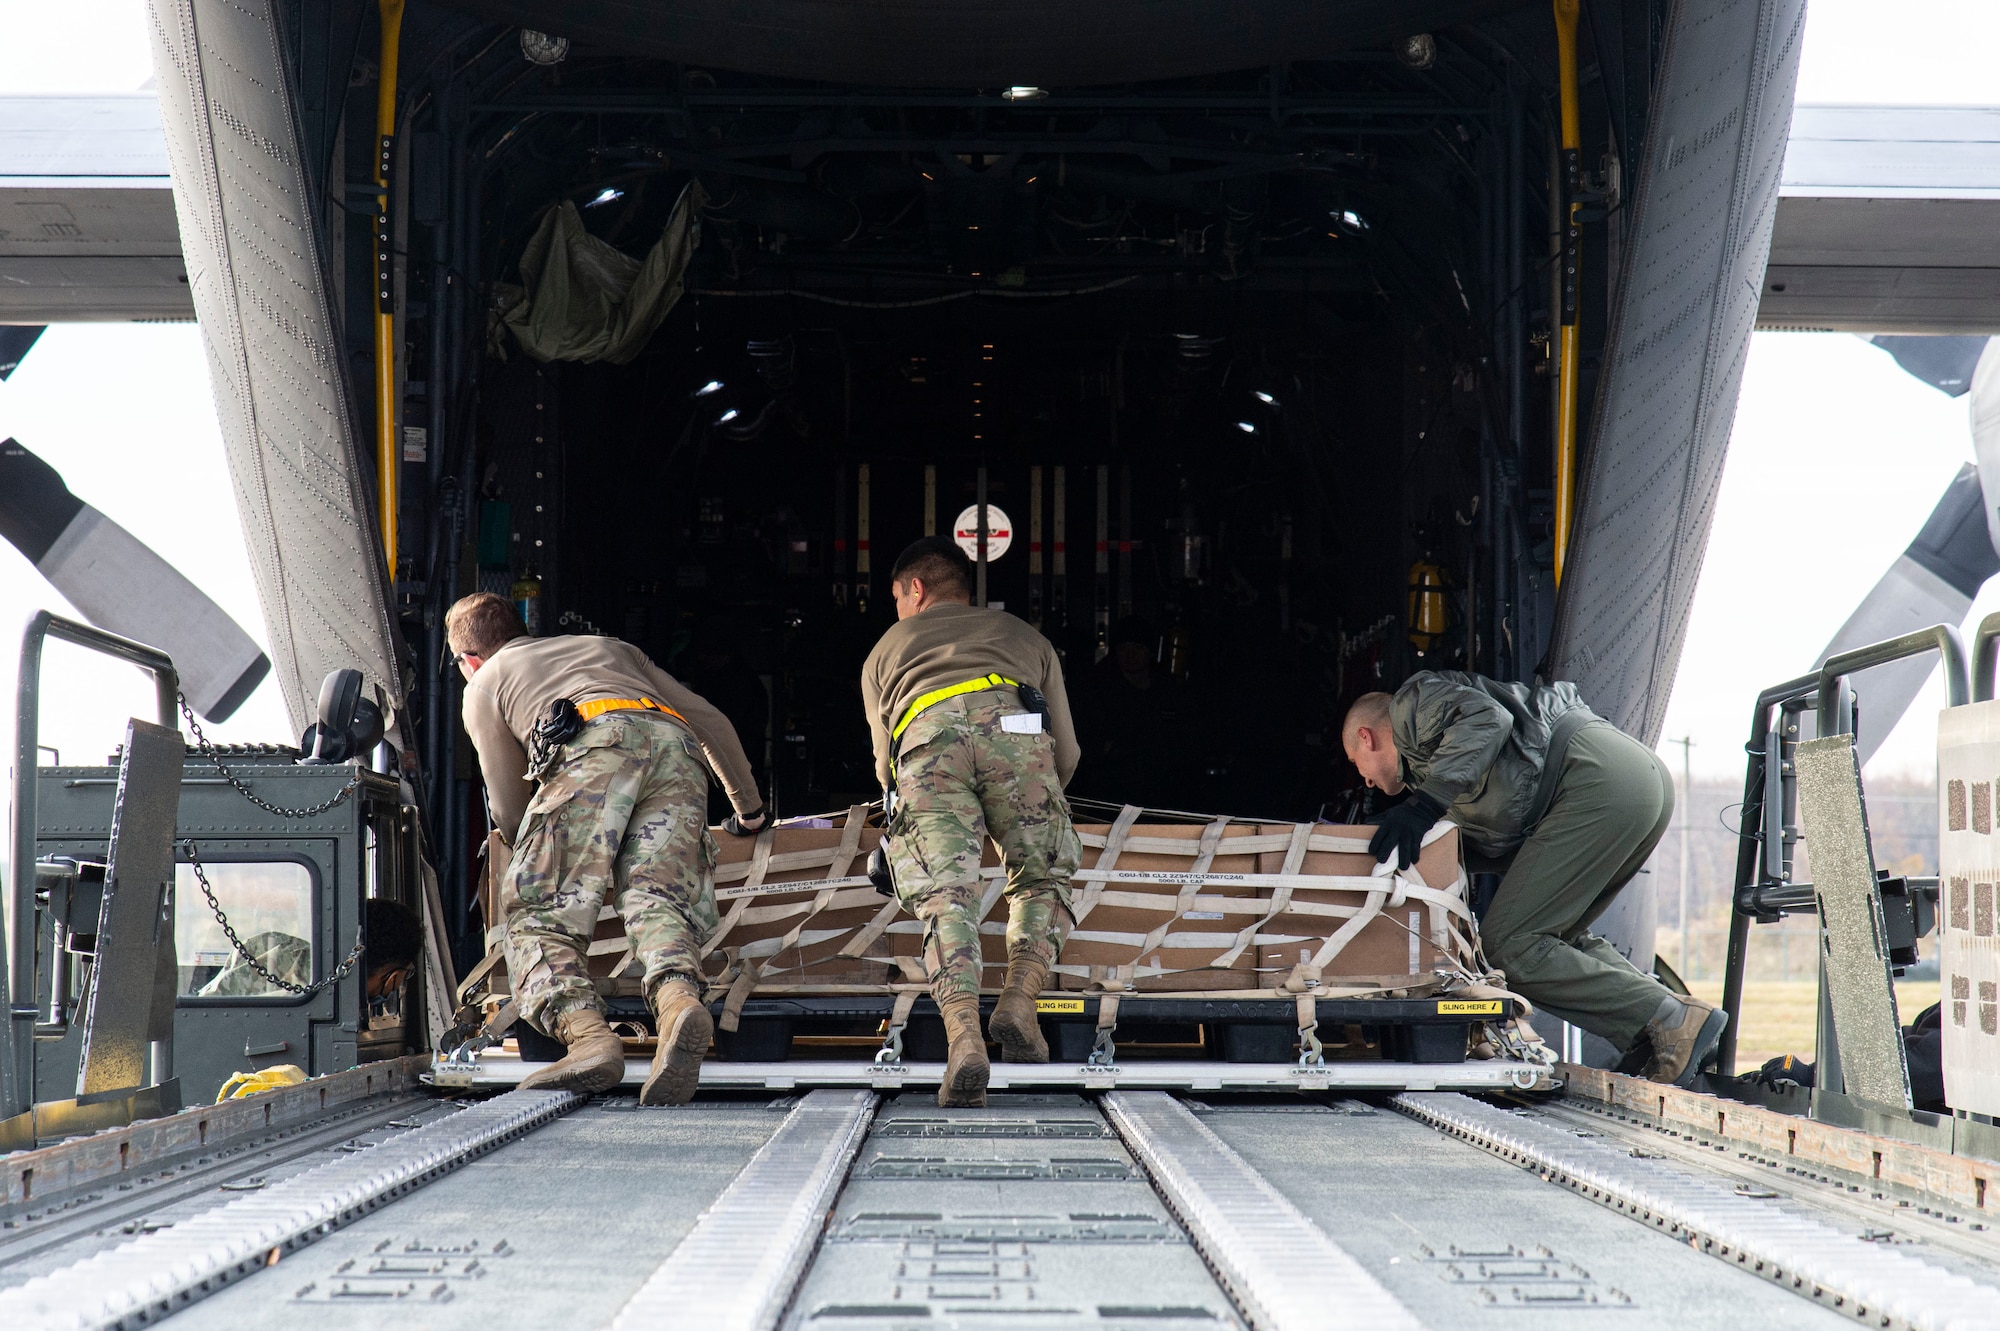 Ramp services personnel from the 436th Aerial Port Squadron, along with a Polish air force loadmaster, load a pallet onto a Polish air force C-130E Hercules Dec. 7, 2021, at Dover Air Force Base, Delaware, during a foreign military sales mission. The United States and Poland have enjoyed decades-long warm bilateral relations. Poland is a stalwart NATO ally, with which the U.S. partners closely on NATO capabilities, counterterrorism, nonproliferation, missile defense and regional cooperation in Central and Eastern Europe. Due to its strategic location, Dover AFB supports approximately $3.5 billion worth of foreign military sales annually. (U.S. Air Force photo by Roland Balik)